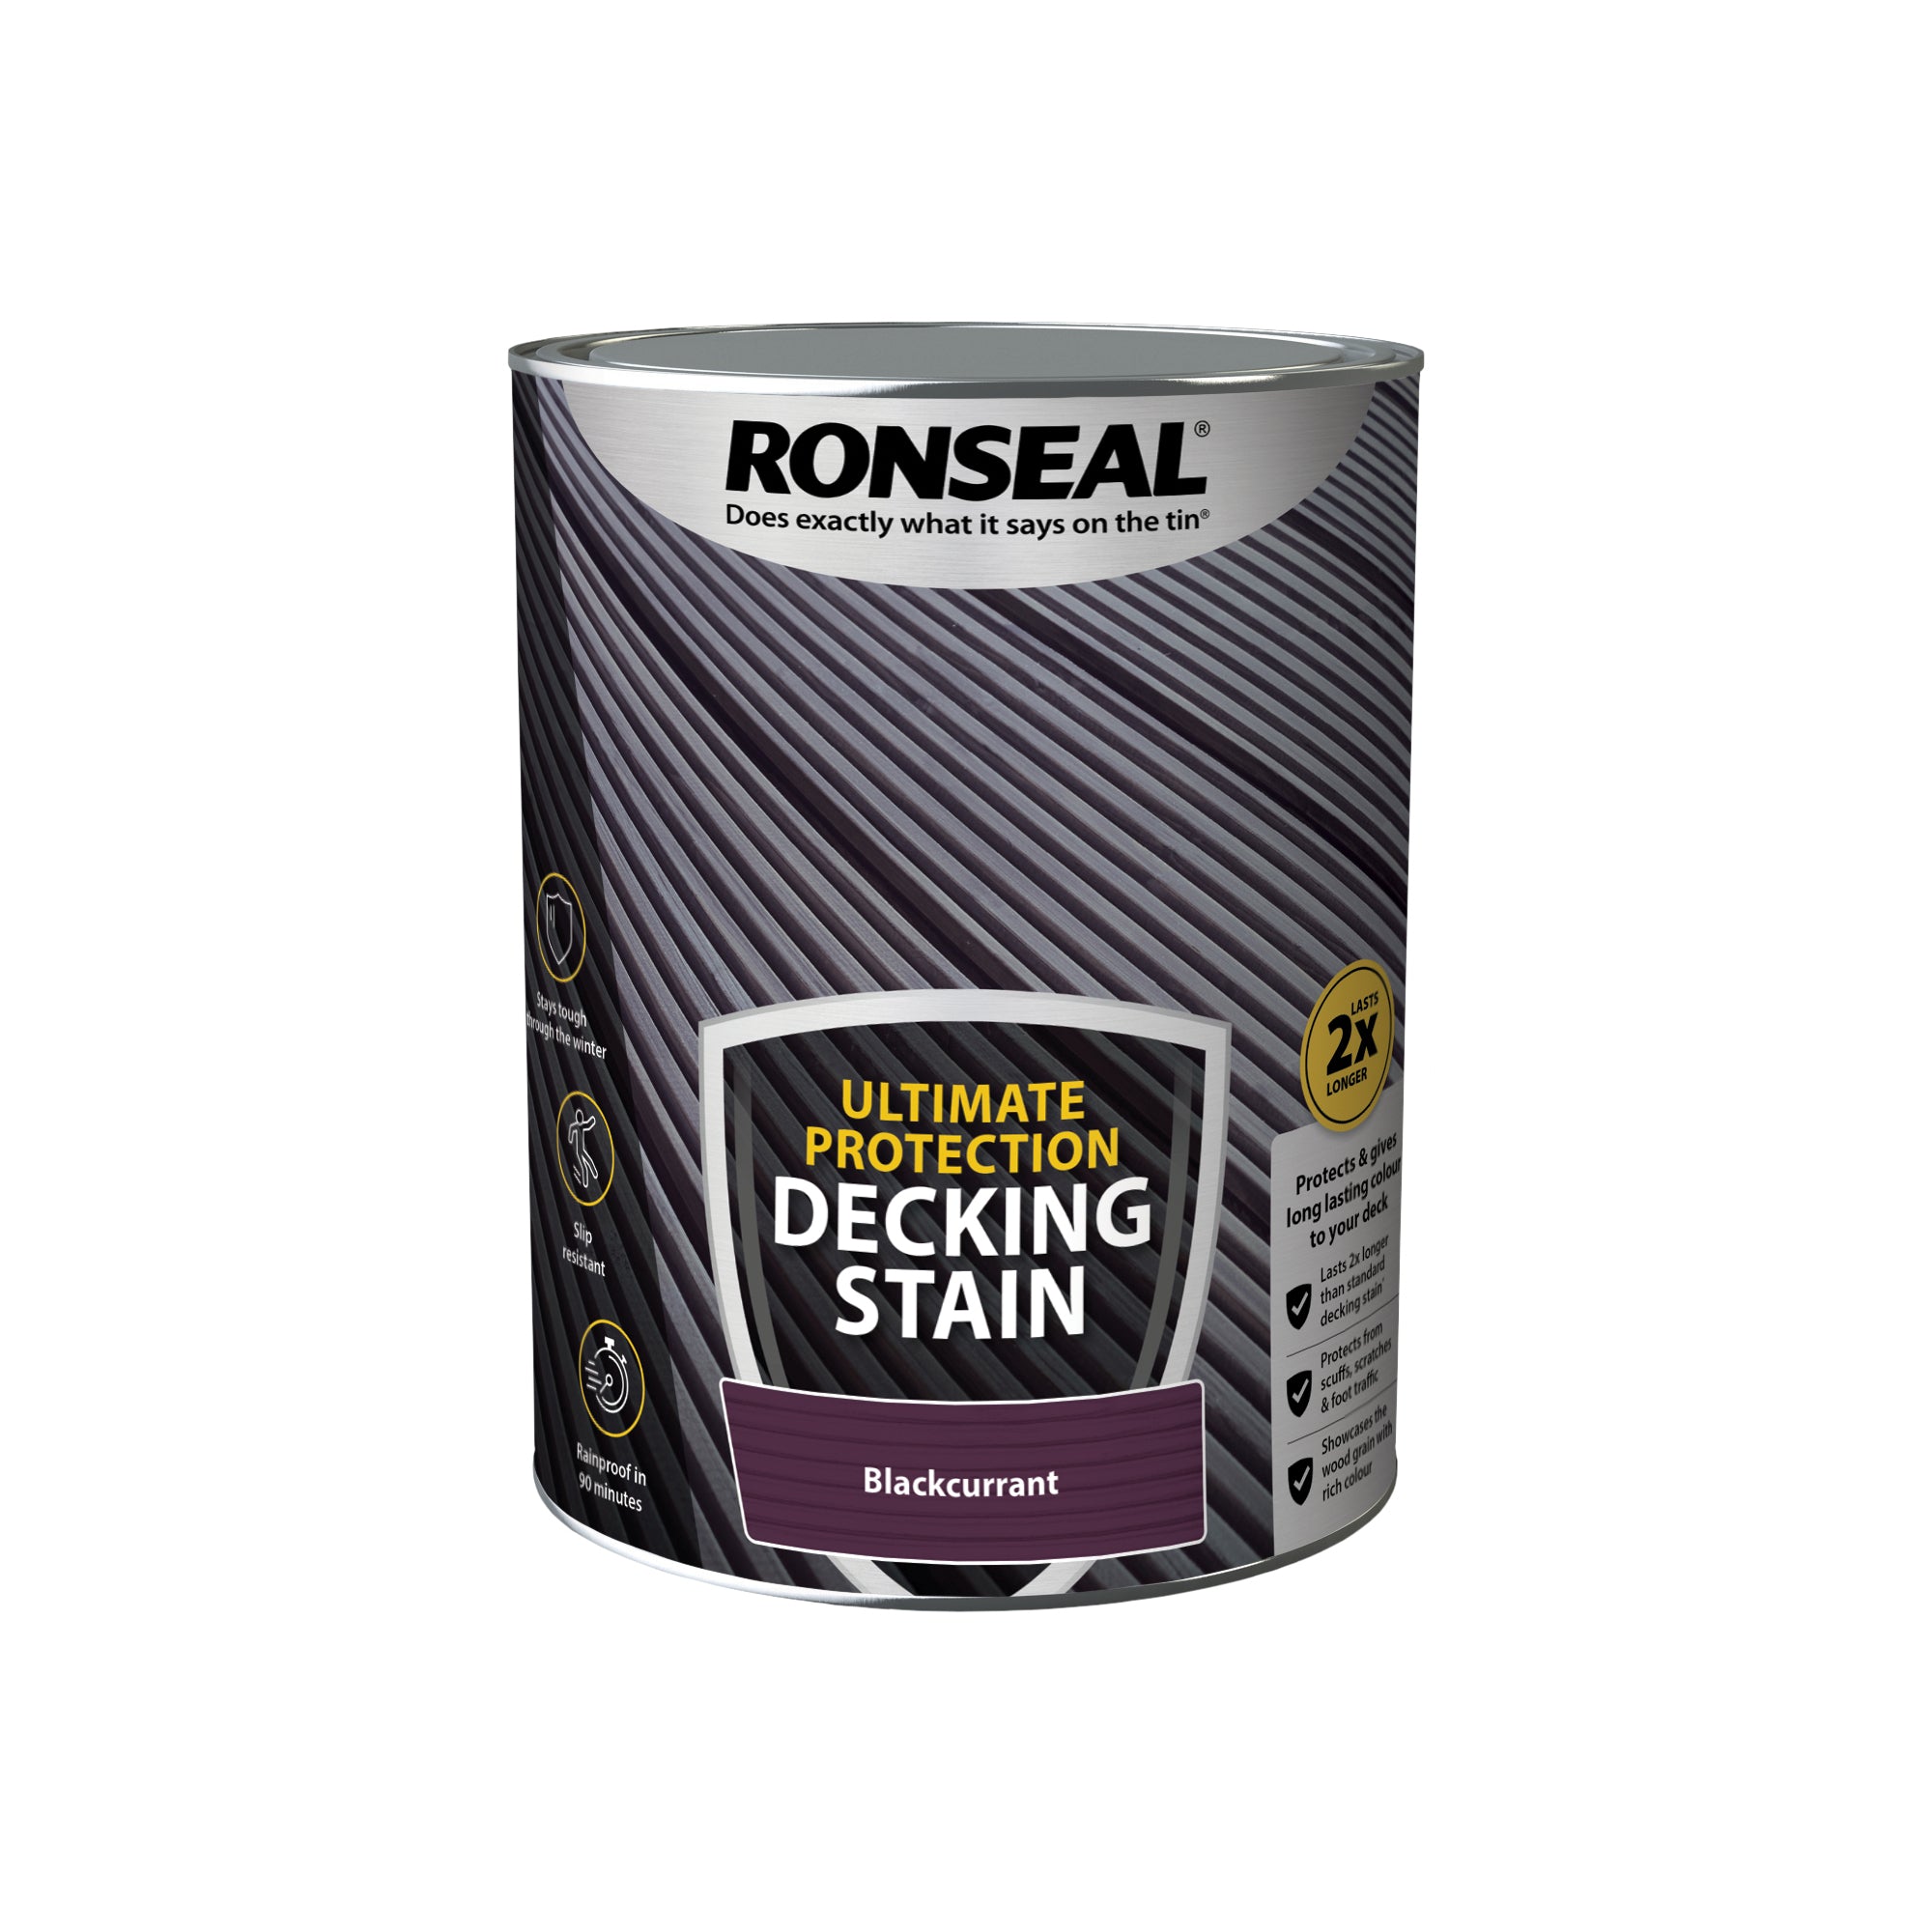 Ronseal-Ultimate-Protection-Decking-Stain-Blackcurrent-5L